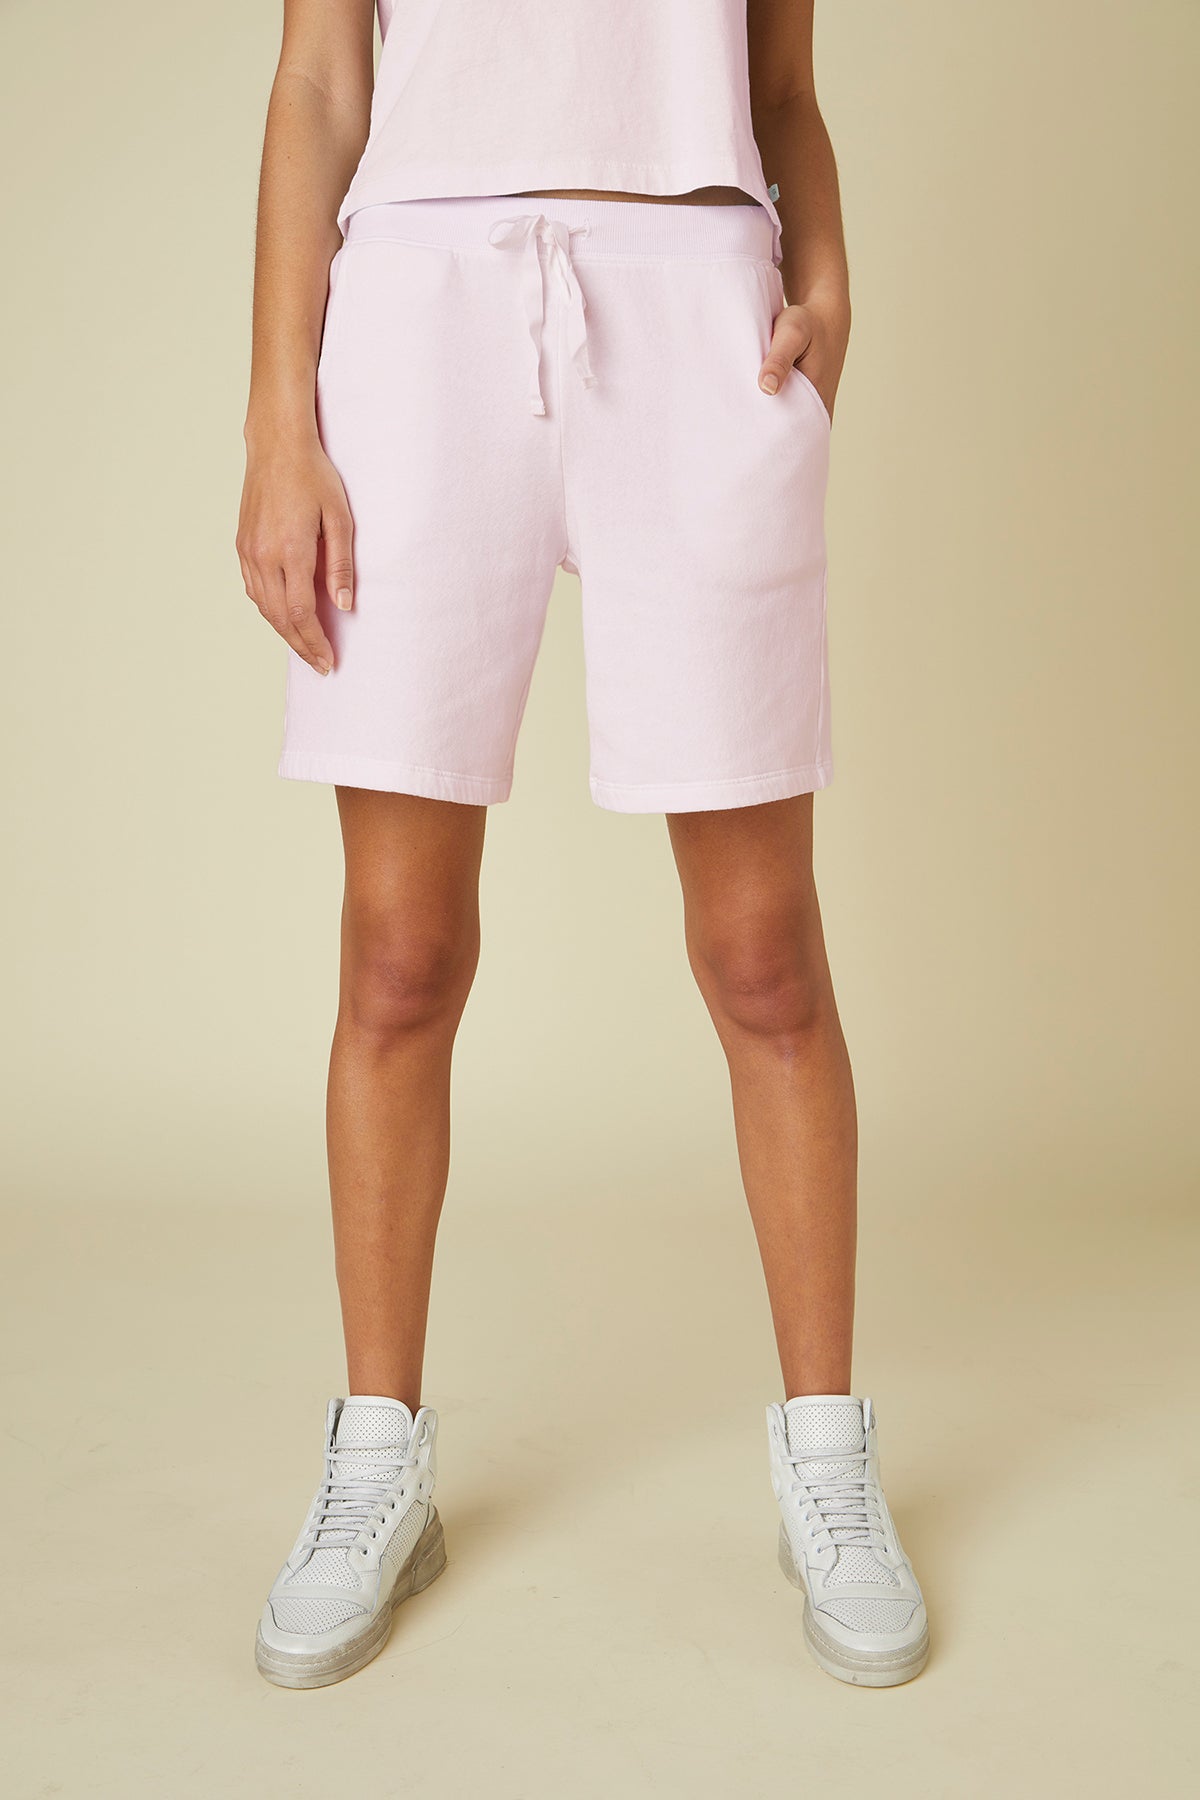 The model is wearing pink Velvet by Jenny Graham LAGUNA SWEATSHORT jogging shorts with an elastic waist and a white t-shirt.-24791114645697